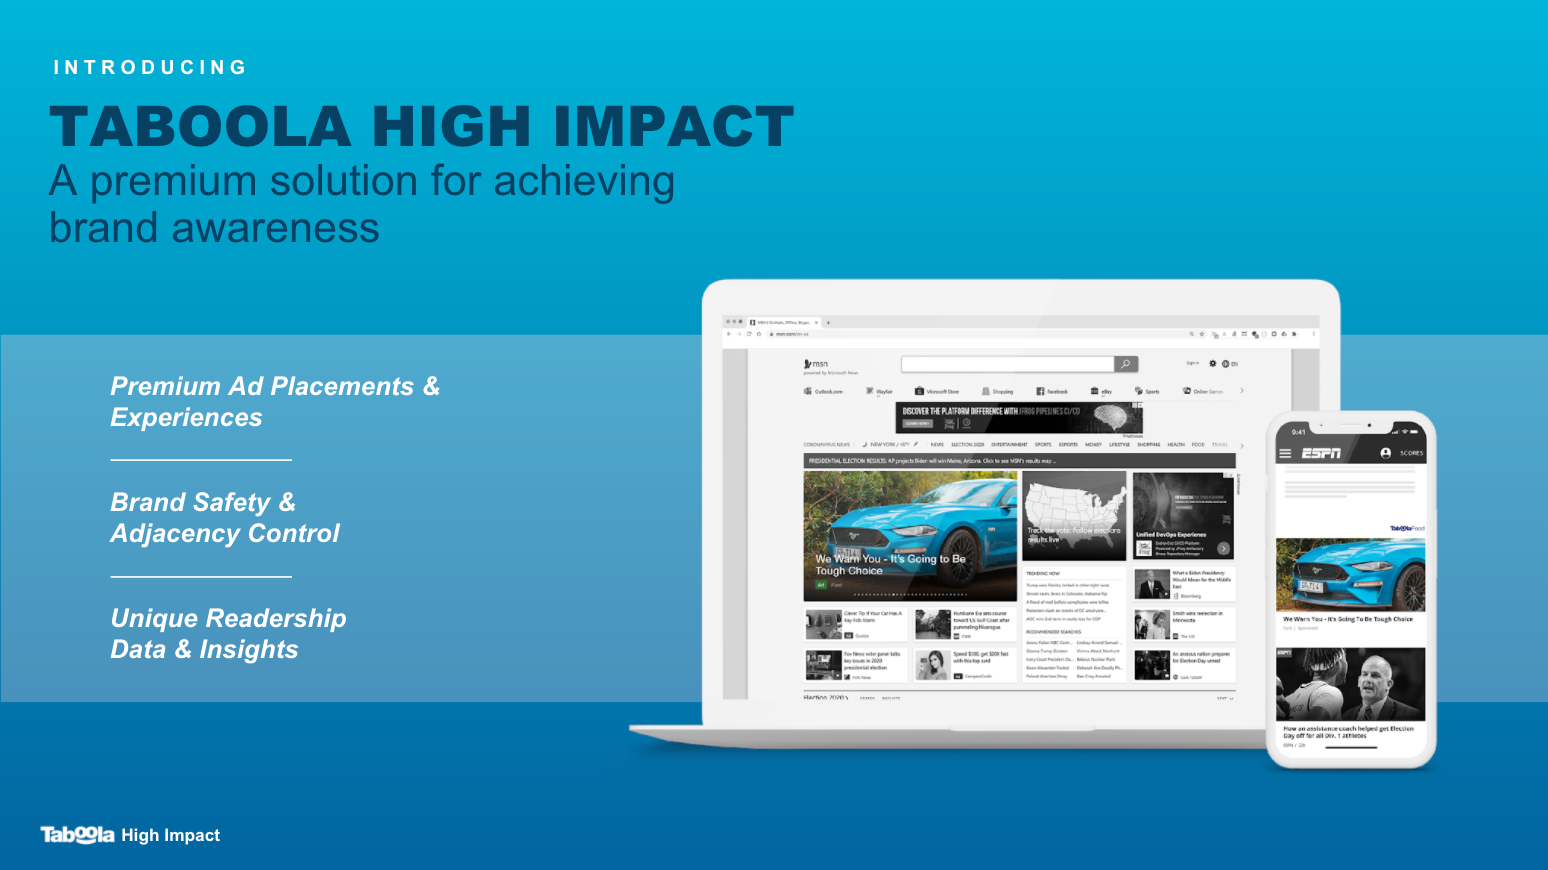 Taboola Launches Taboola High Impact, A New Brand Awareness Solution  for Agencies And Brand Advertisers